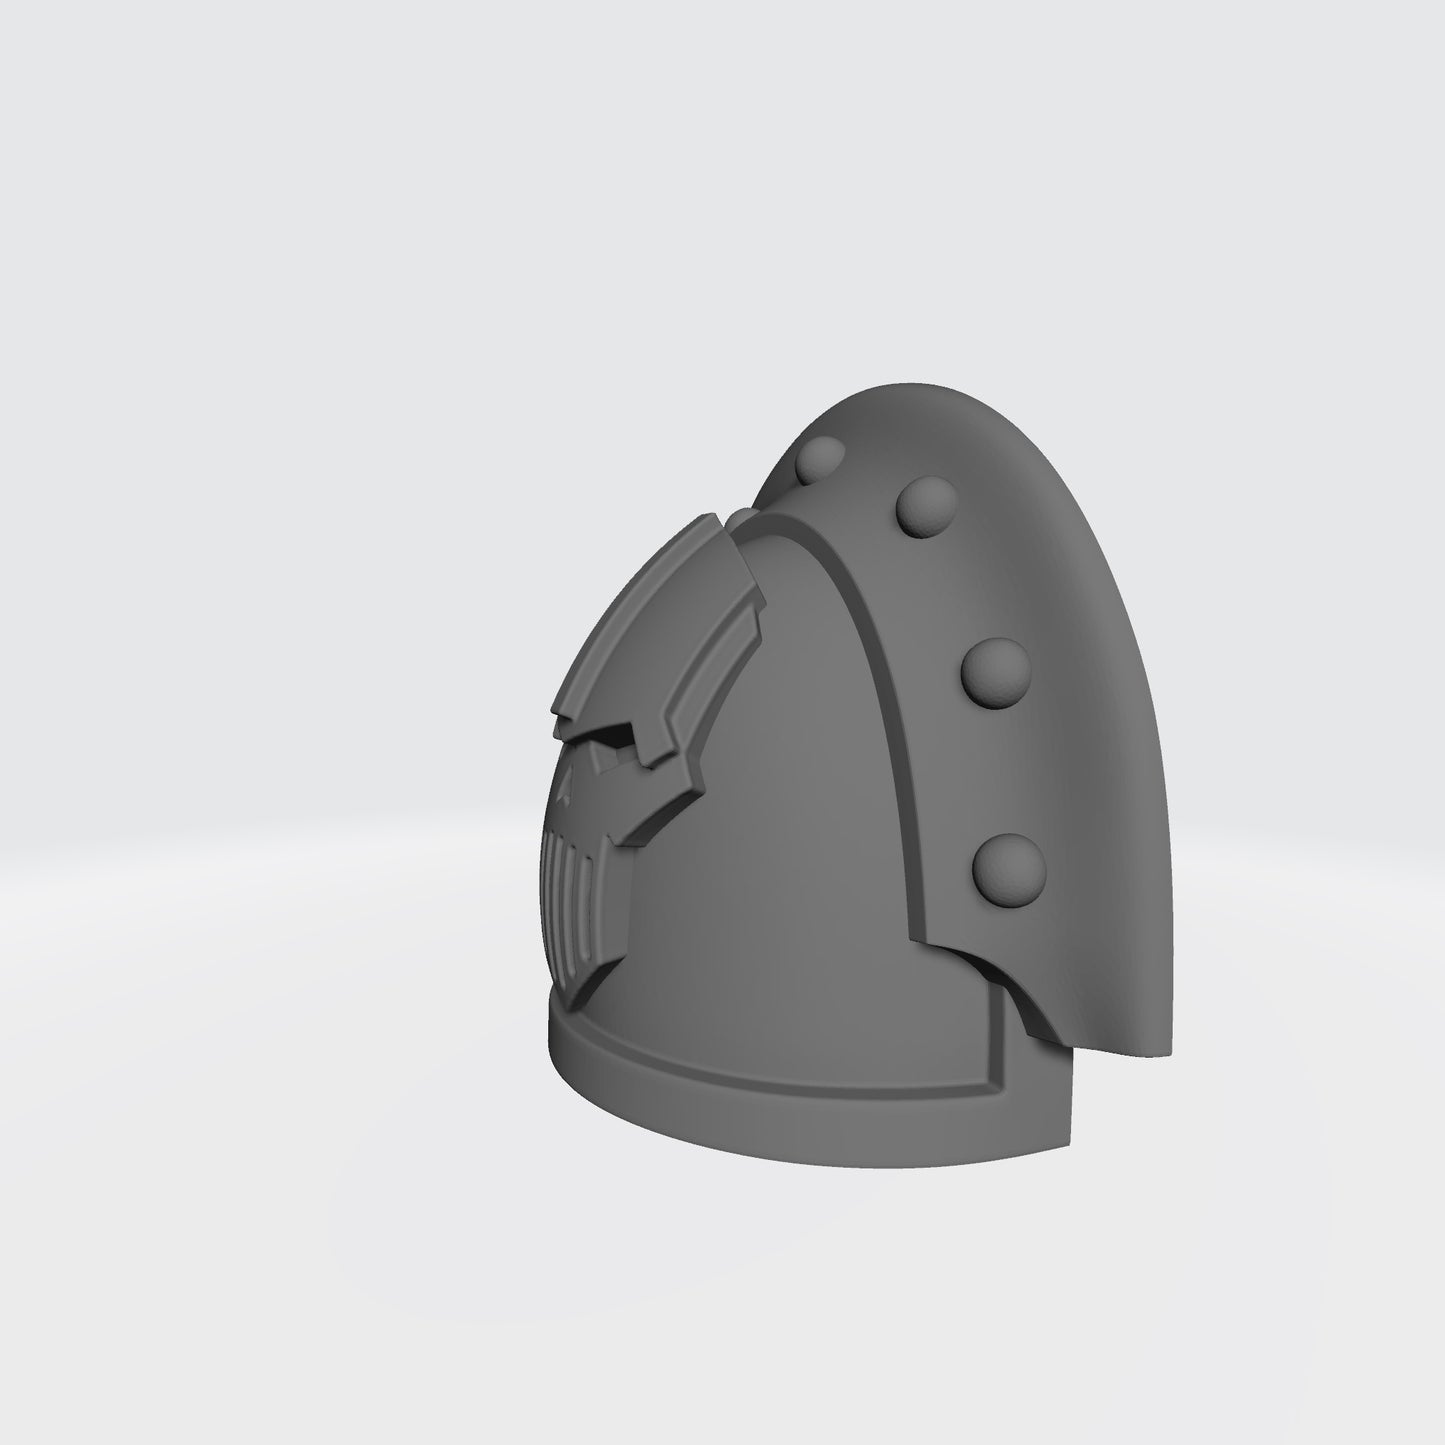 Iron Warriors MKIII Shoulder Pad with Rivets Compatible with McFarlane Toys 1:12th Scale Space Marine Action Figures Left Angle